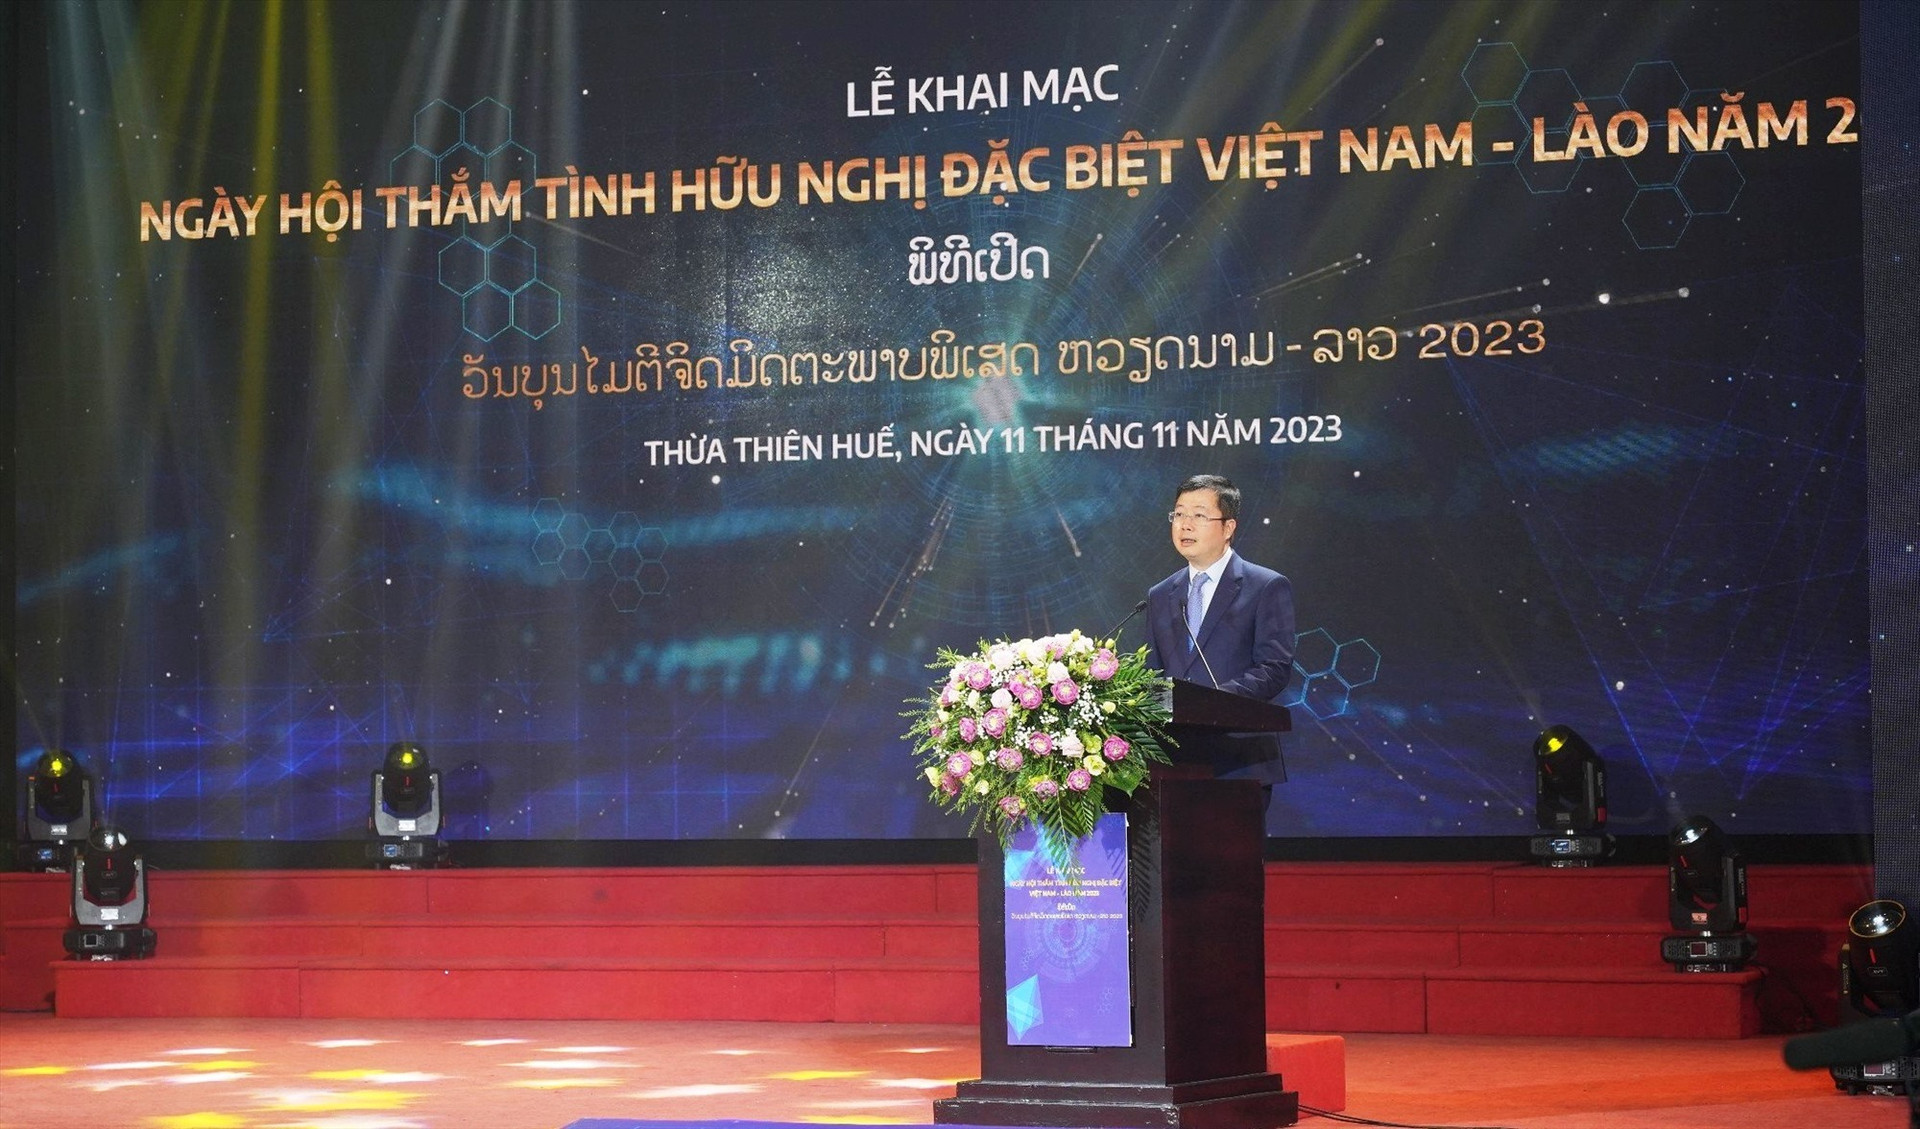 Deputy Minister of Information and Communications Nguyen Thanh Lam speaks at the opening ceremony.